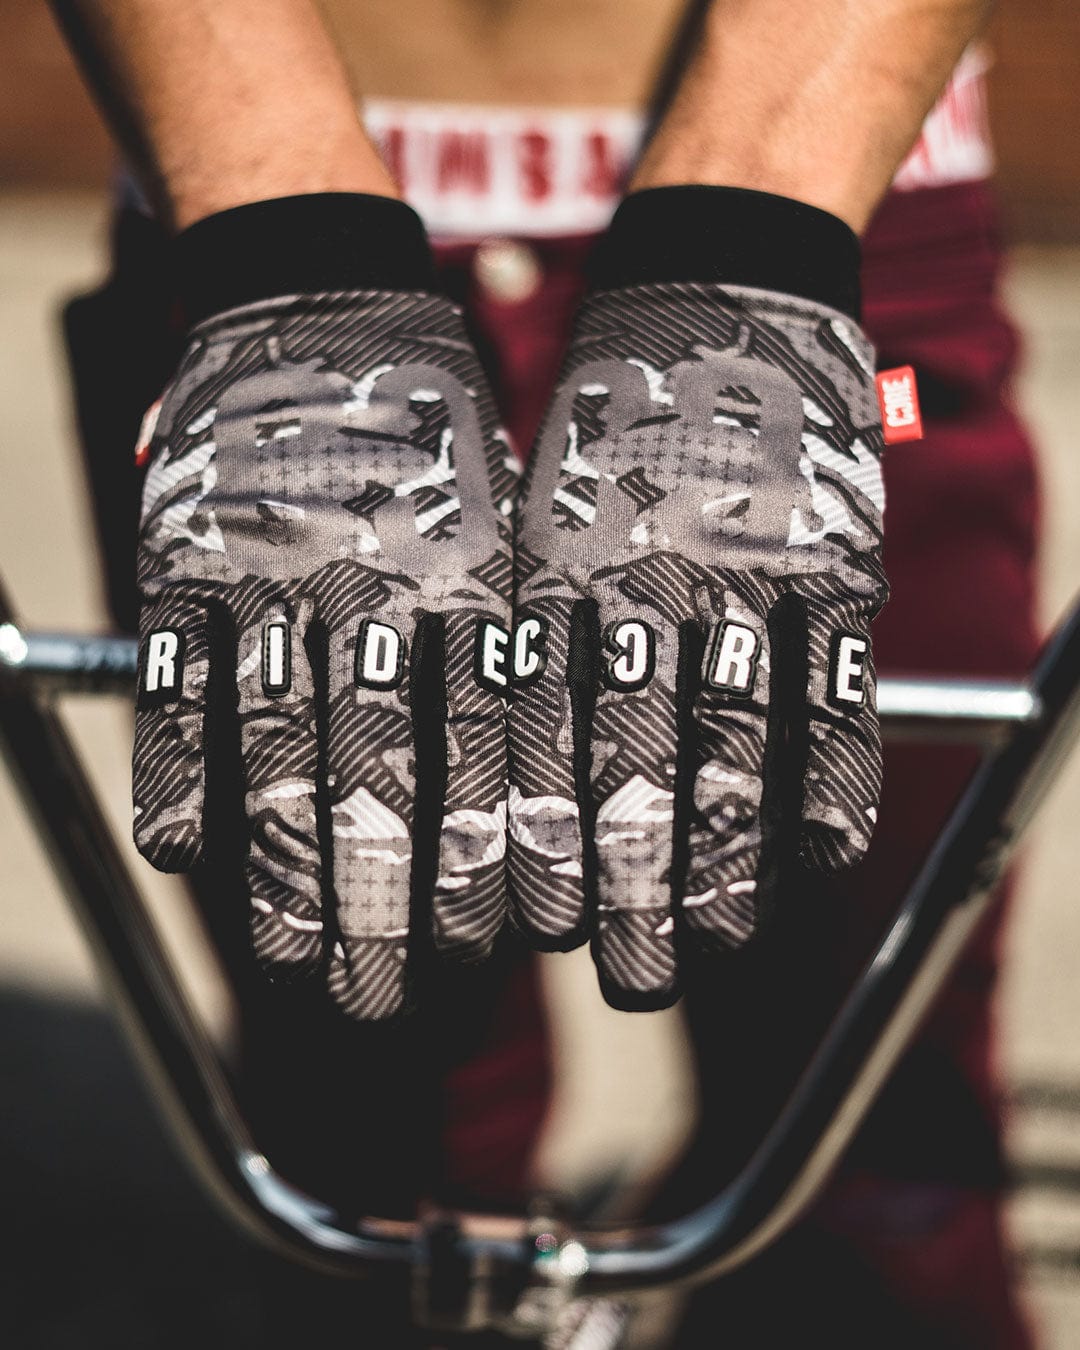 CORE Protection BMX Gloves Black Camo I Bike Gloves Products Together